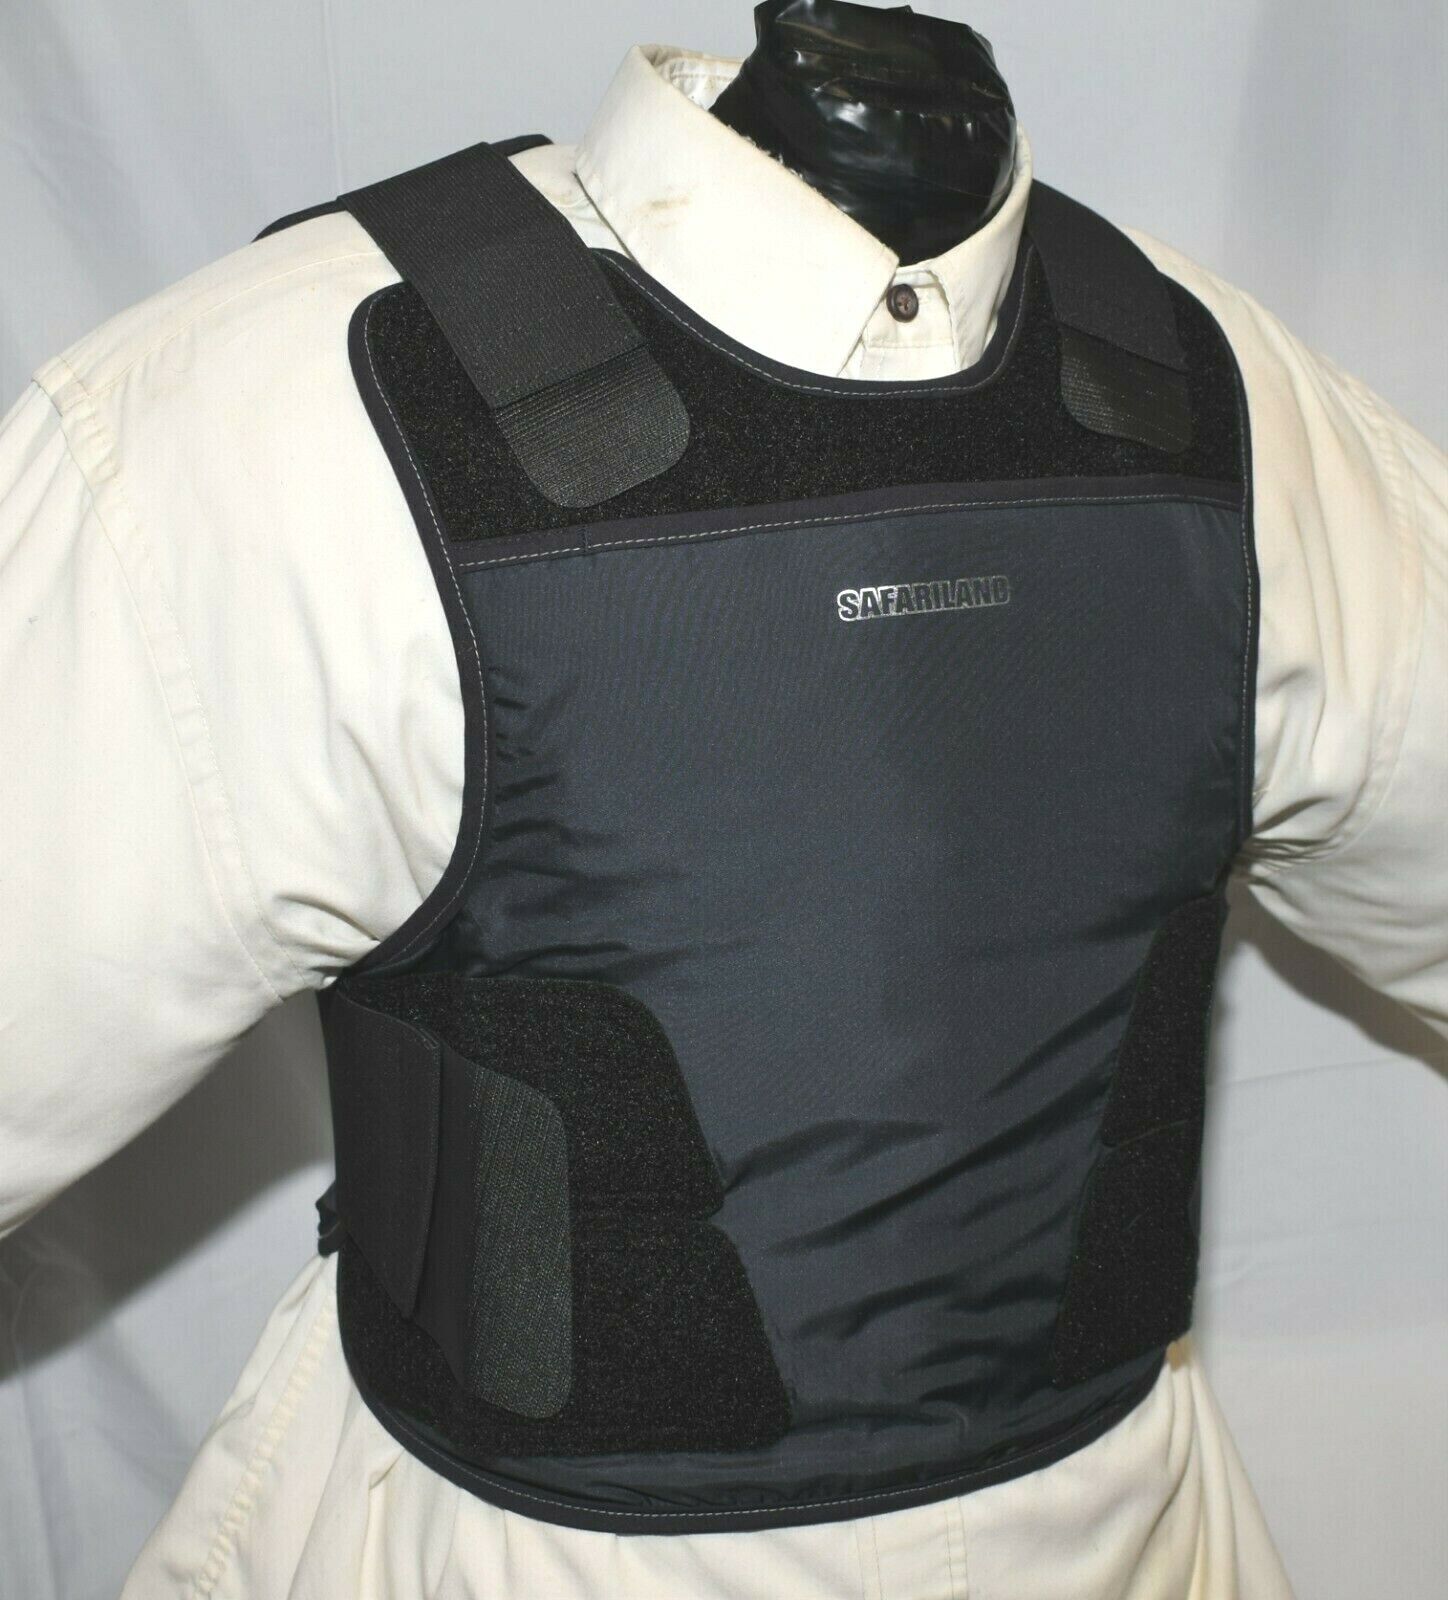 New Med Safariland Concealable Vest IIIA Inserts Inc Body Armor Bullet Proof 